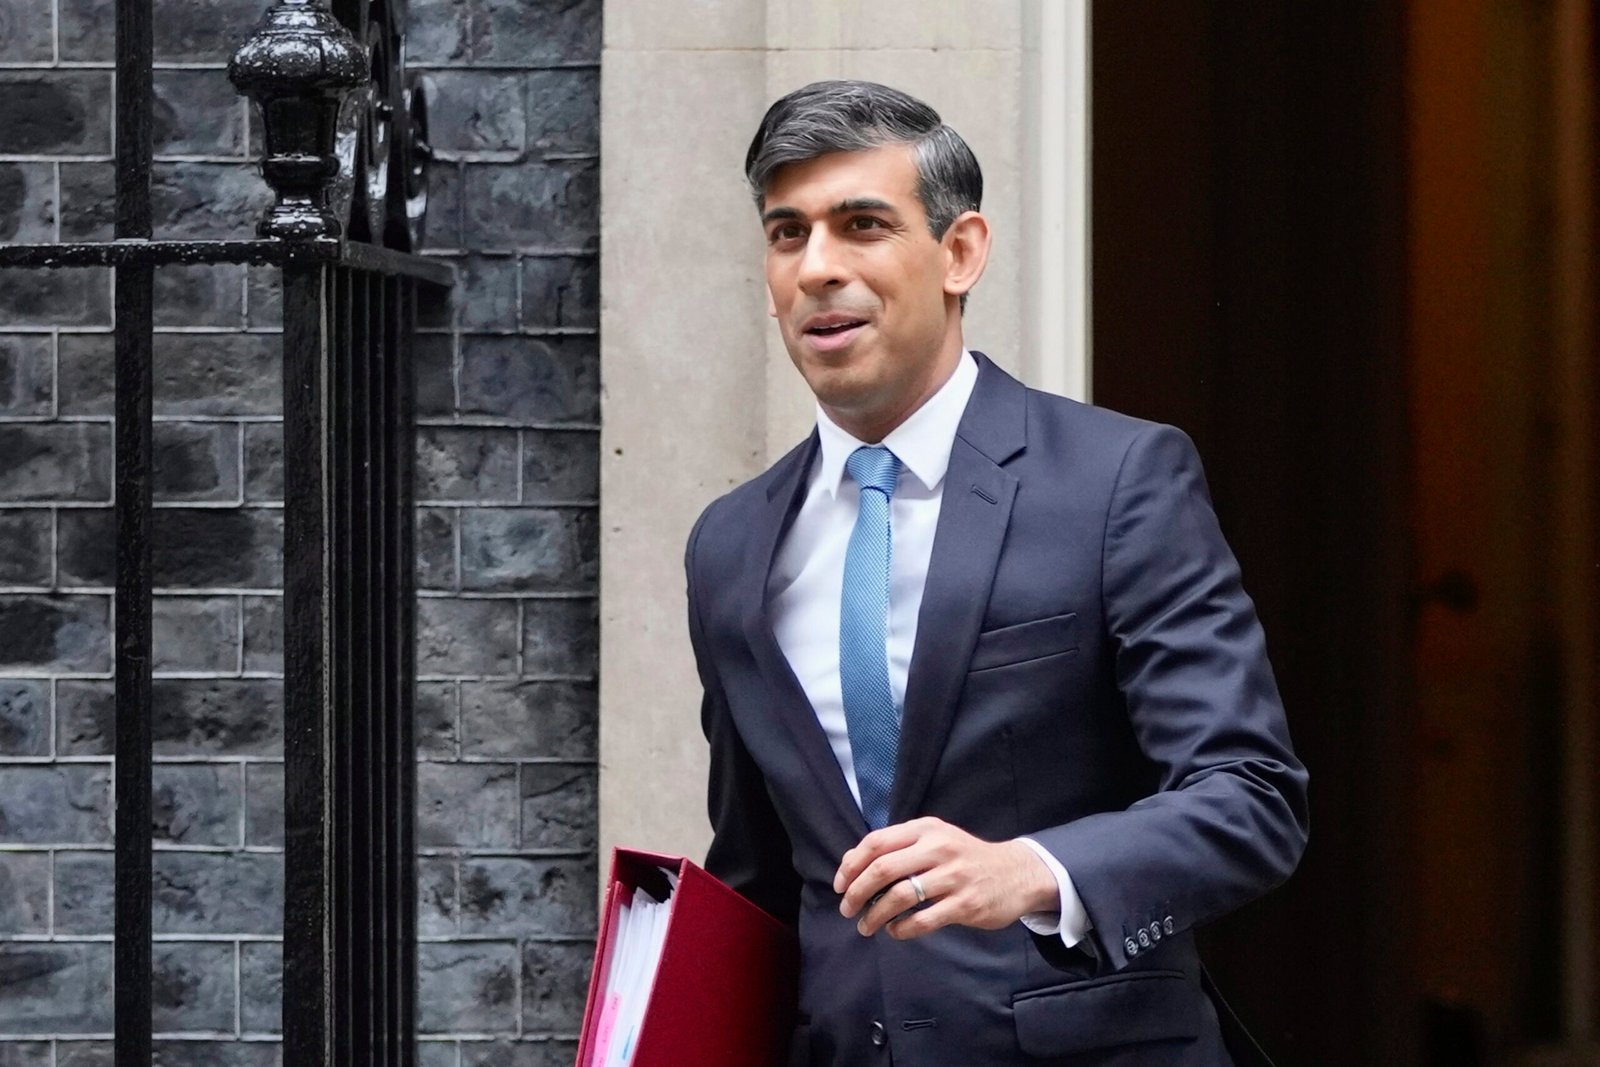 Only Conservatives Can Give Tough Fight To Labour Party: Rishi Sunak